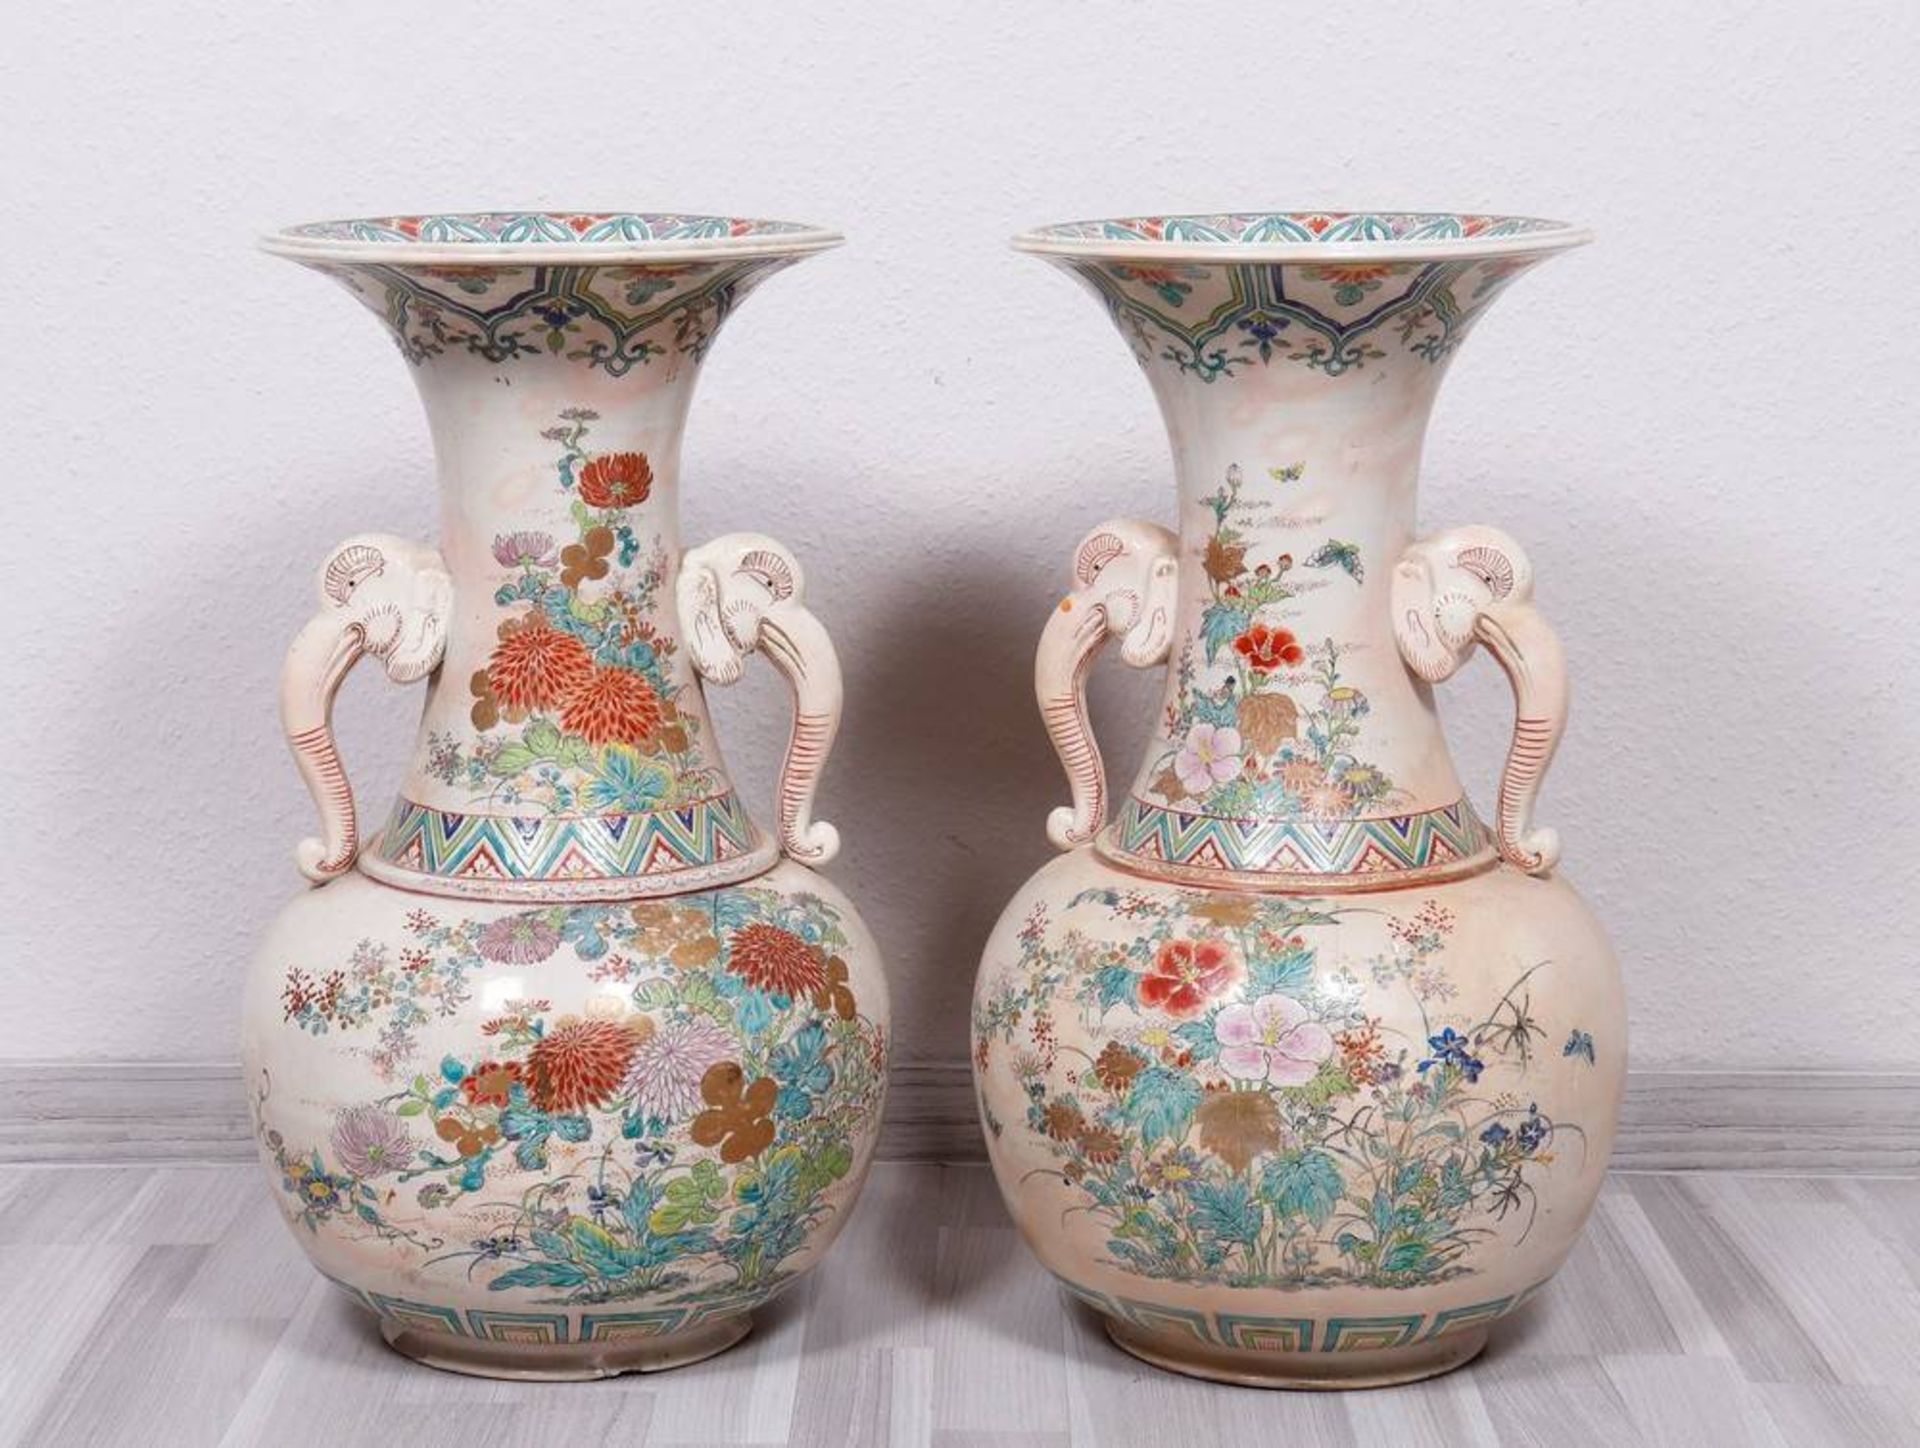 Pair of large vases, China, probably early 20th C. - Image 2 of 6